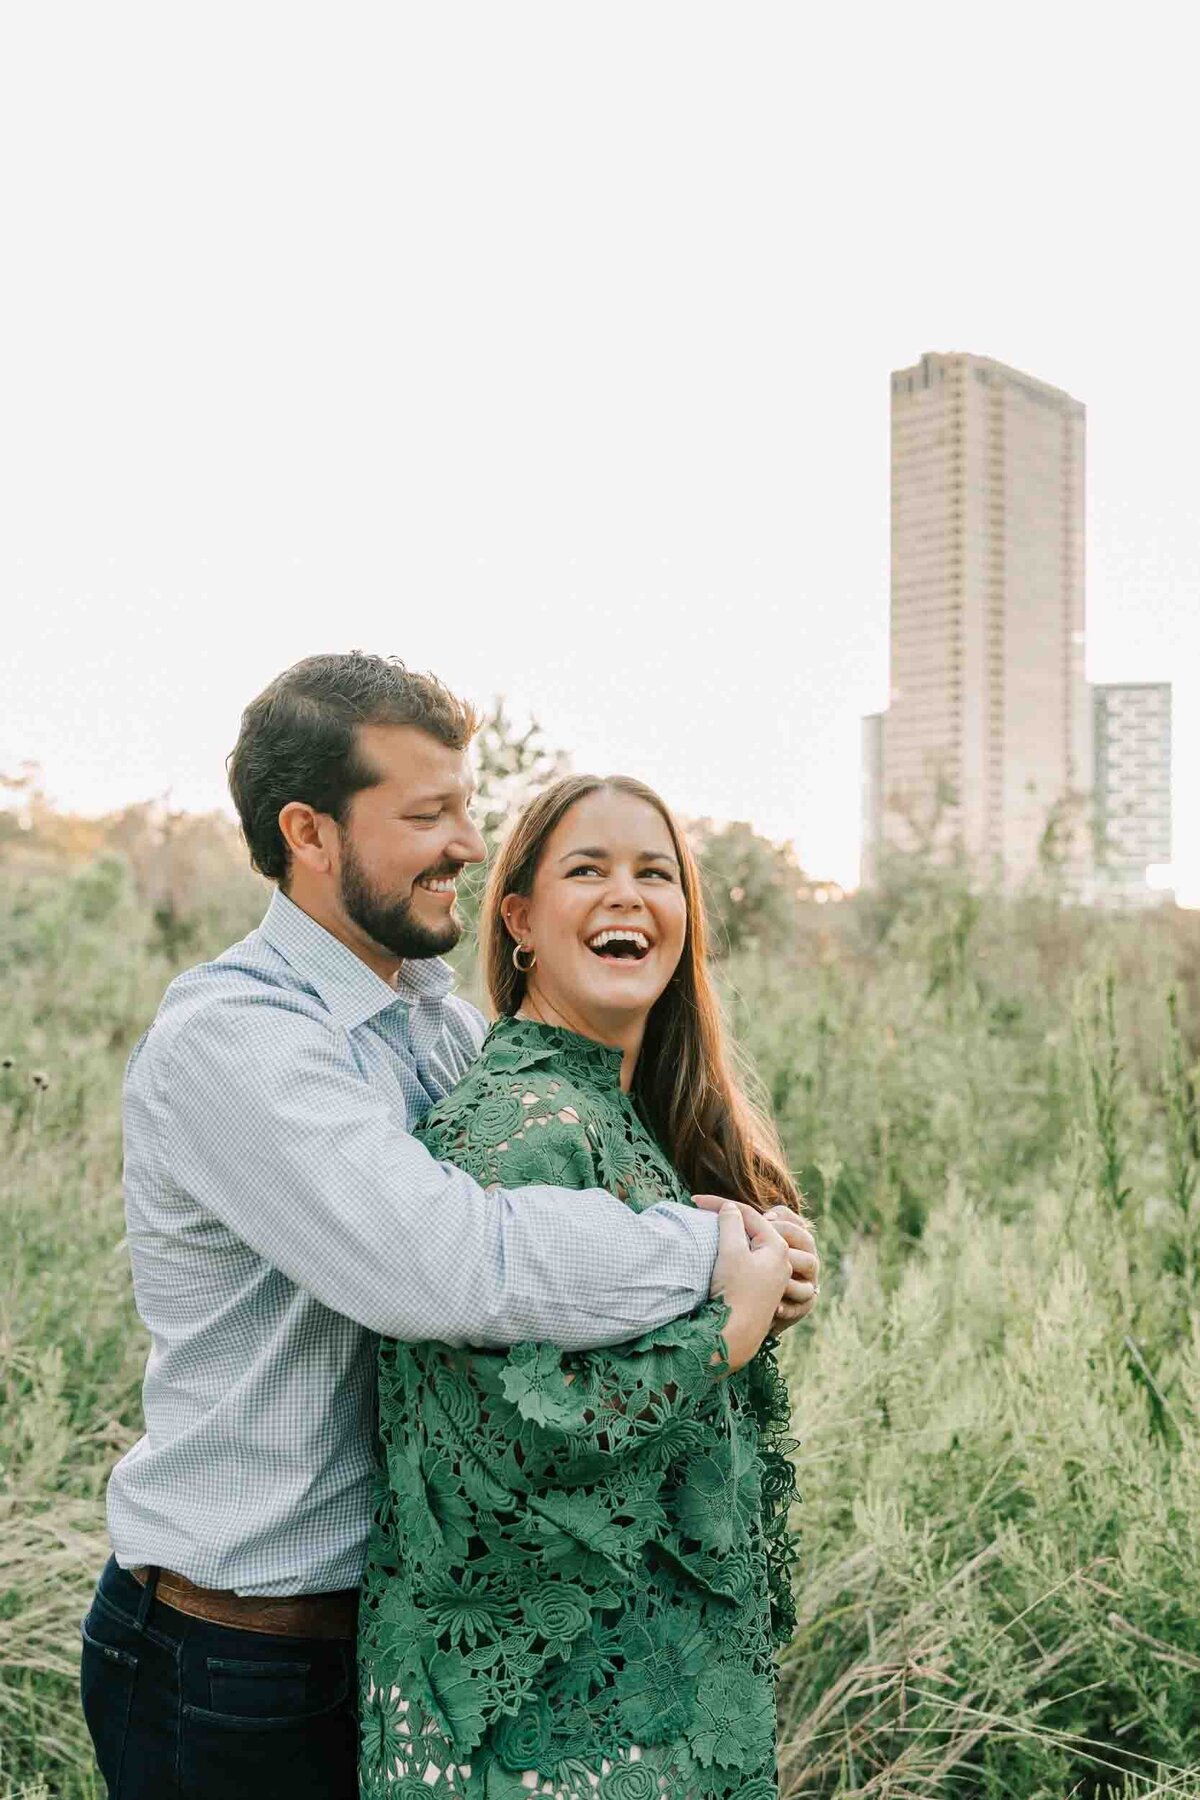 kimberly and garrett take engagement photos with houston skyline behind them while he holds his arms around her.